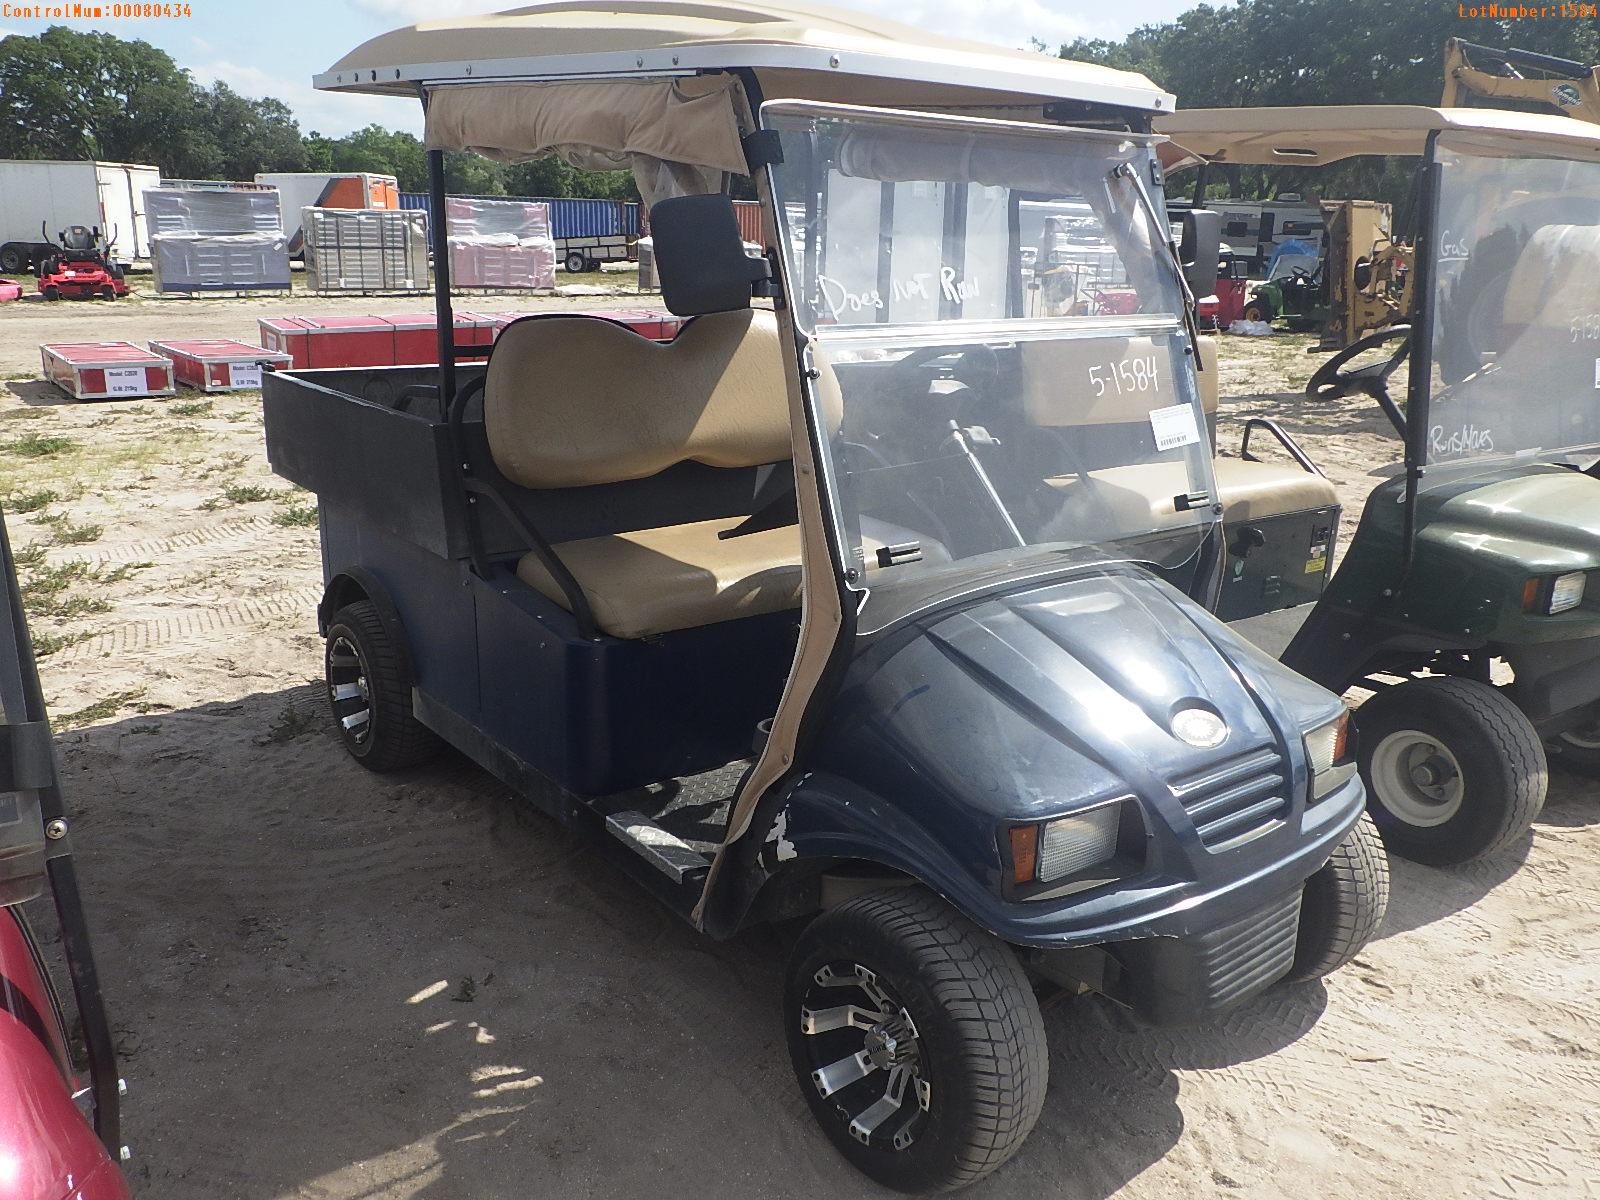 5-01584 (Equip.-Cart)  Seller: Gov-Tampa Bay Water CRUISE CAR SIDE BY SIDE GOLF